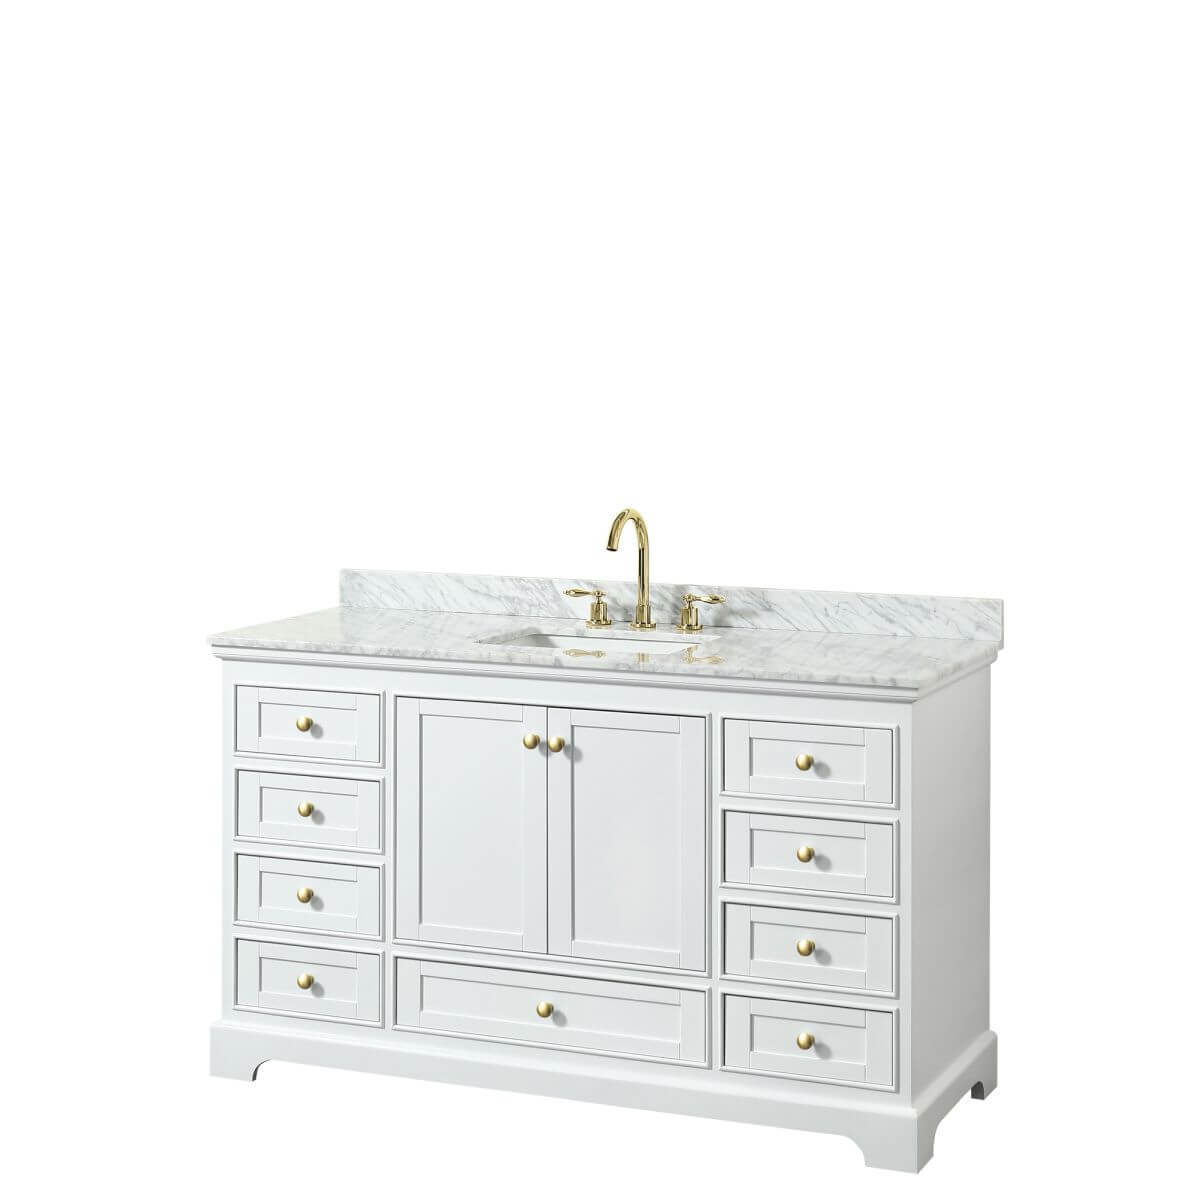 Wyndham Collection Deborah 60 inch Single Bathroom Vanity in White with White Carrara Marble Countertop, Undermount Square Sink, Brushed Gold Trim and No Mirror - WCS202060SWGCMUNSMXX